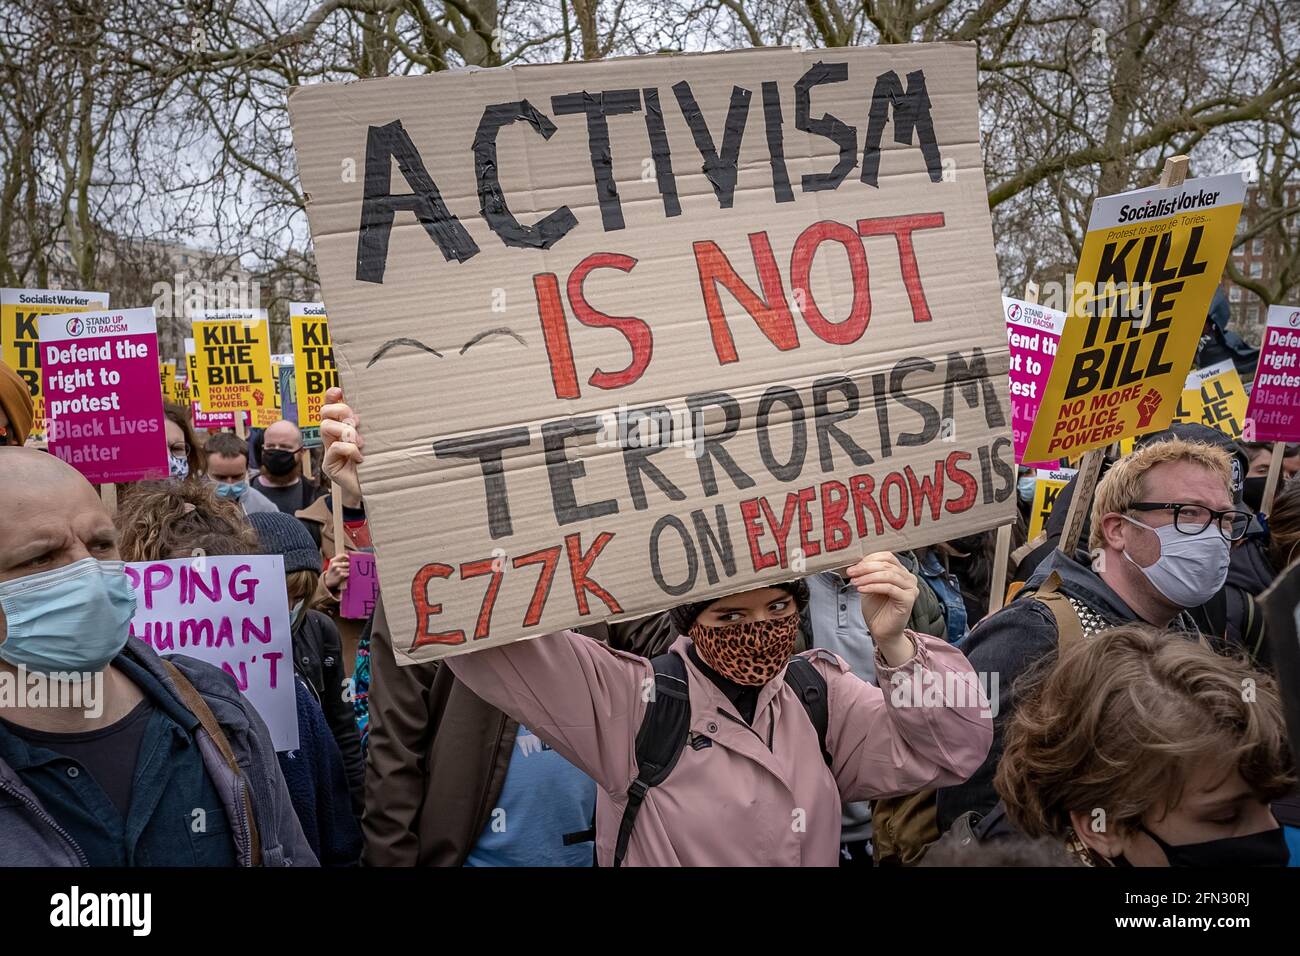 Kill The Bill Protest. Thousands of protesters gather in Hyde Park to demonstrate against a proposed ‘anti-protest’ policing crime bill. London, UK Stock Photo